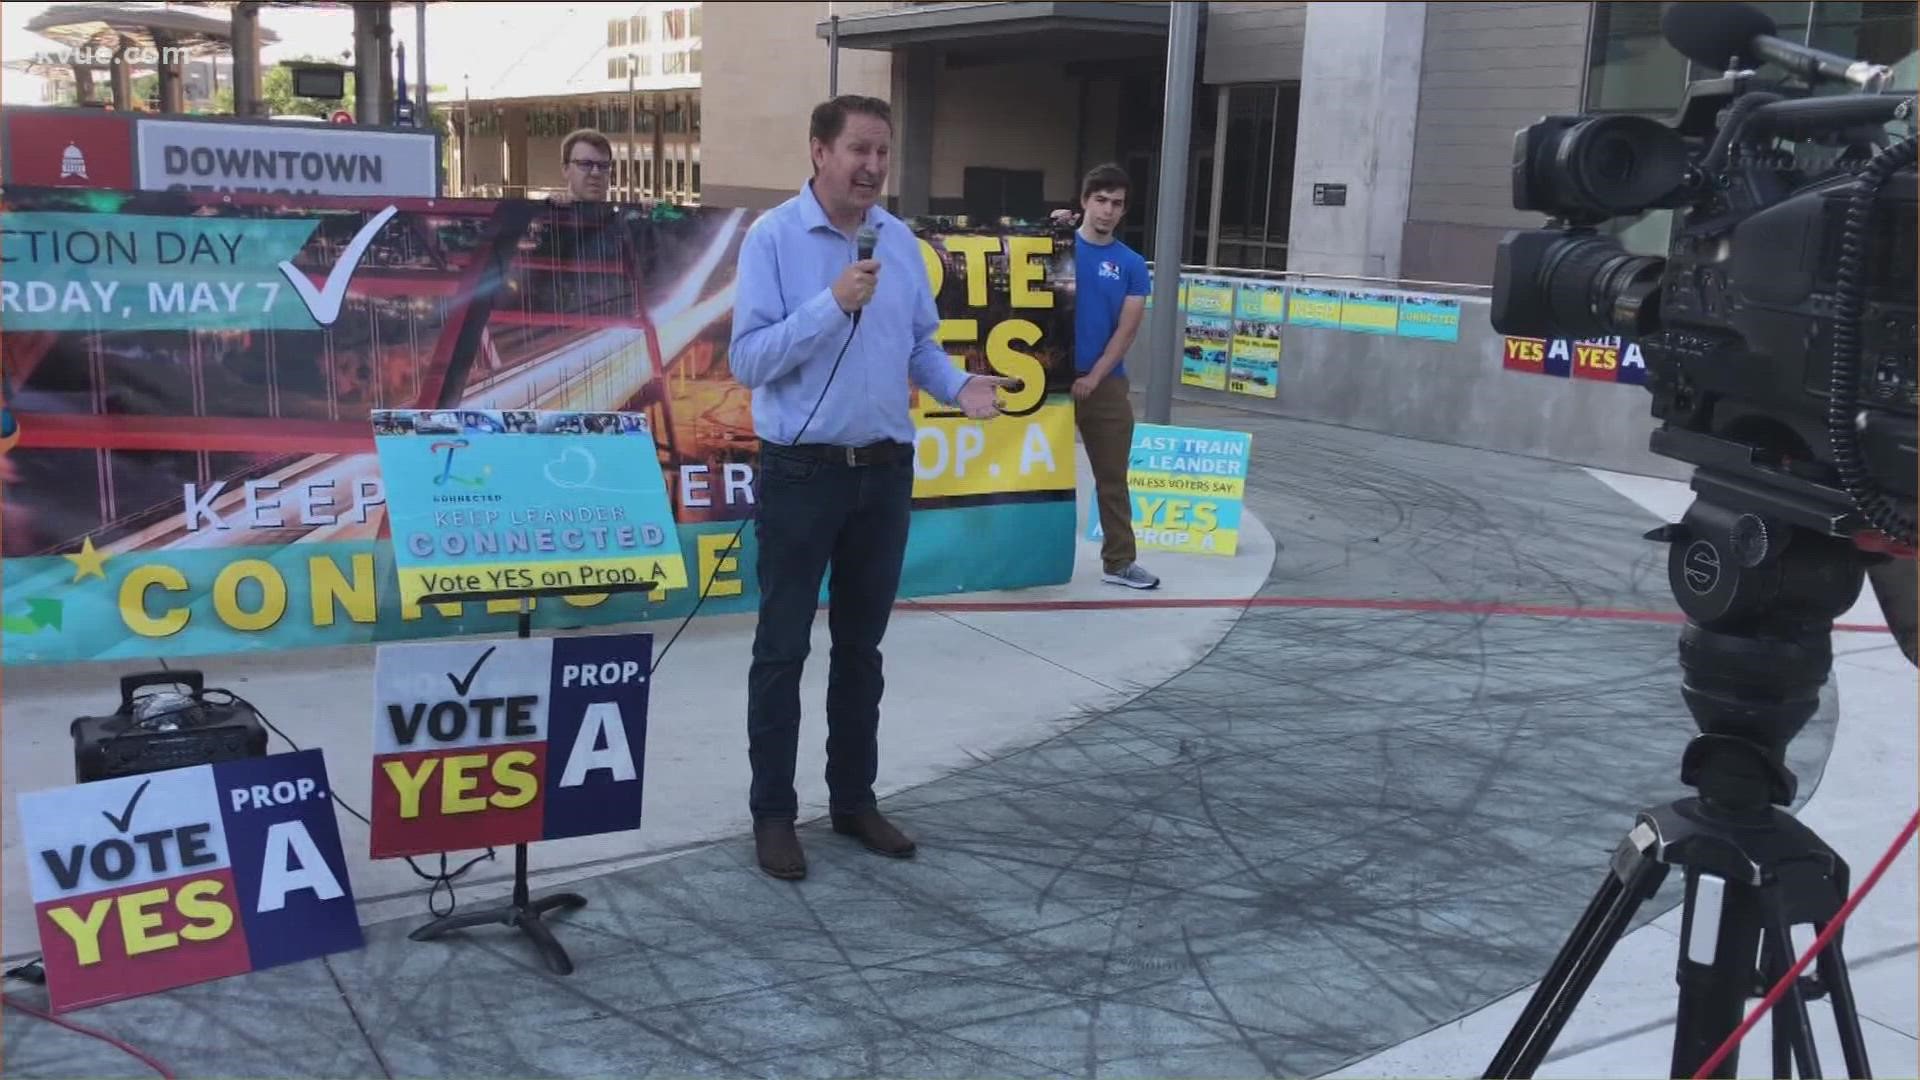 Leander voters have a big decision to make when it comes to public transit services. On Friday, many of them rallied at the Downtown Austin train station.